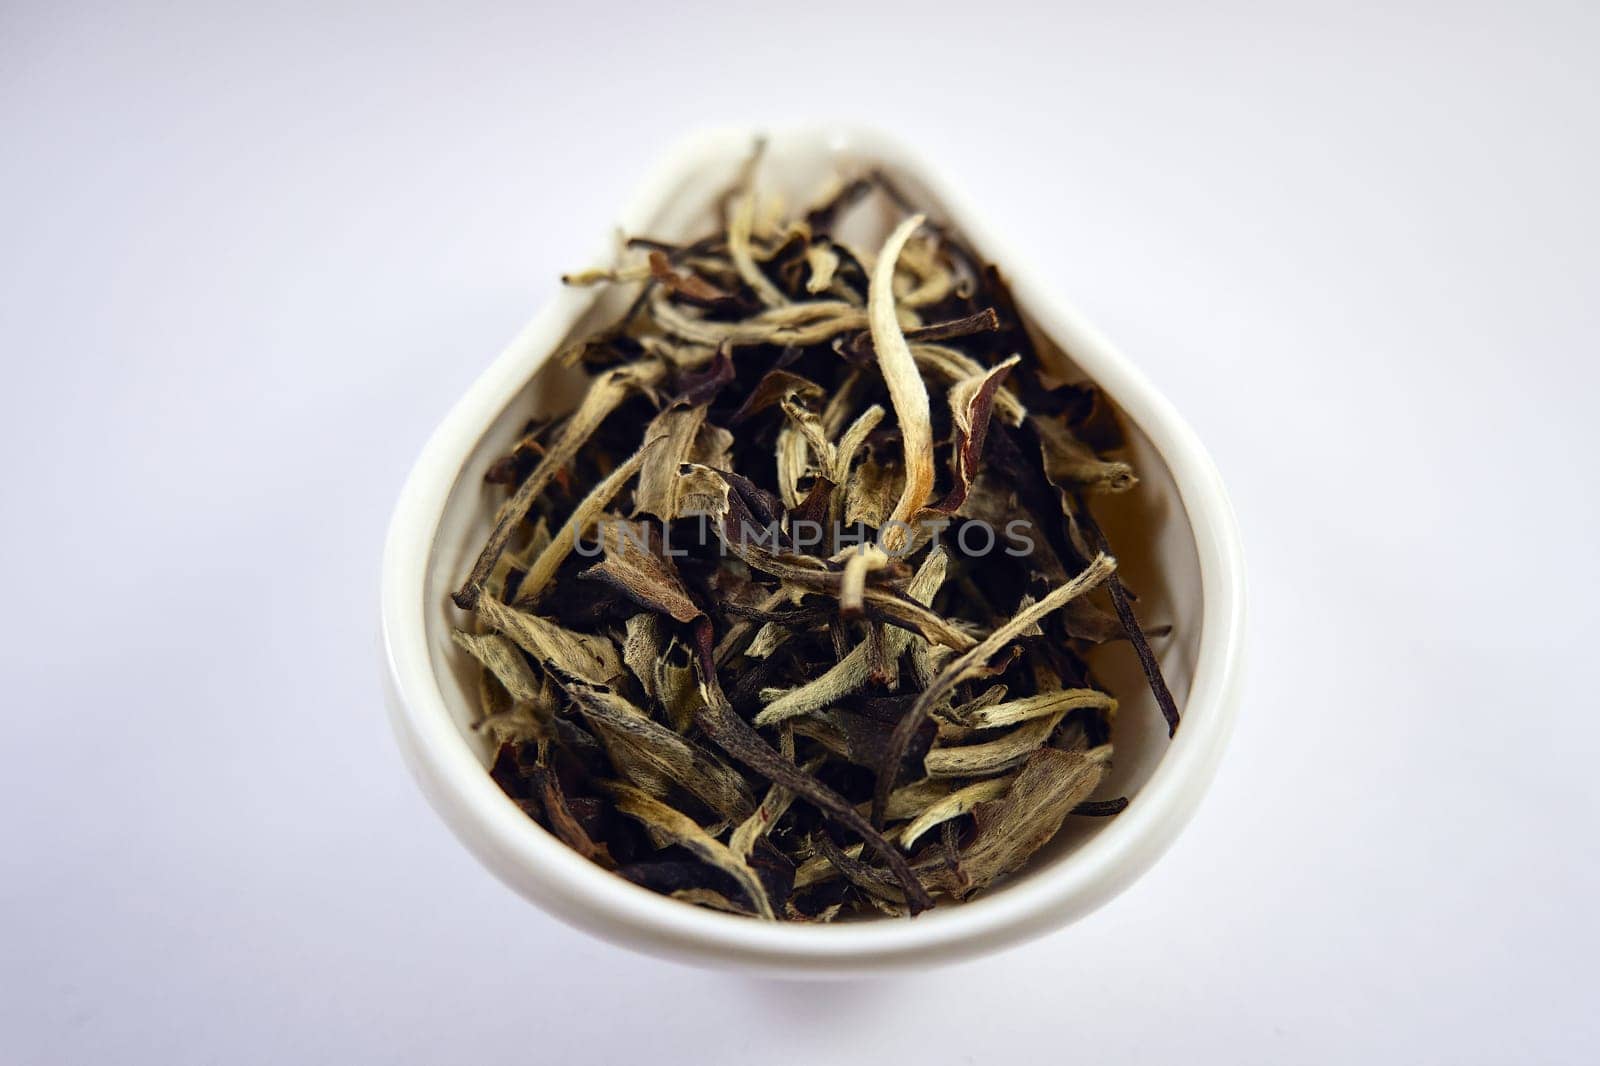 Dry Chinese white tea in a white porcelain bowl close-up. Selective focus